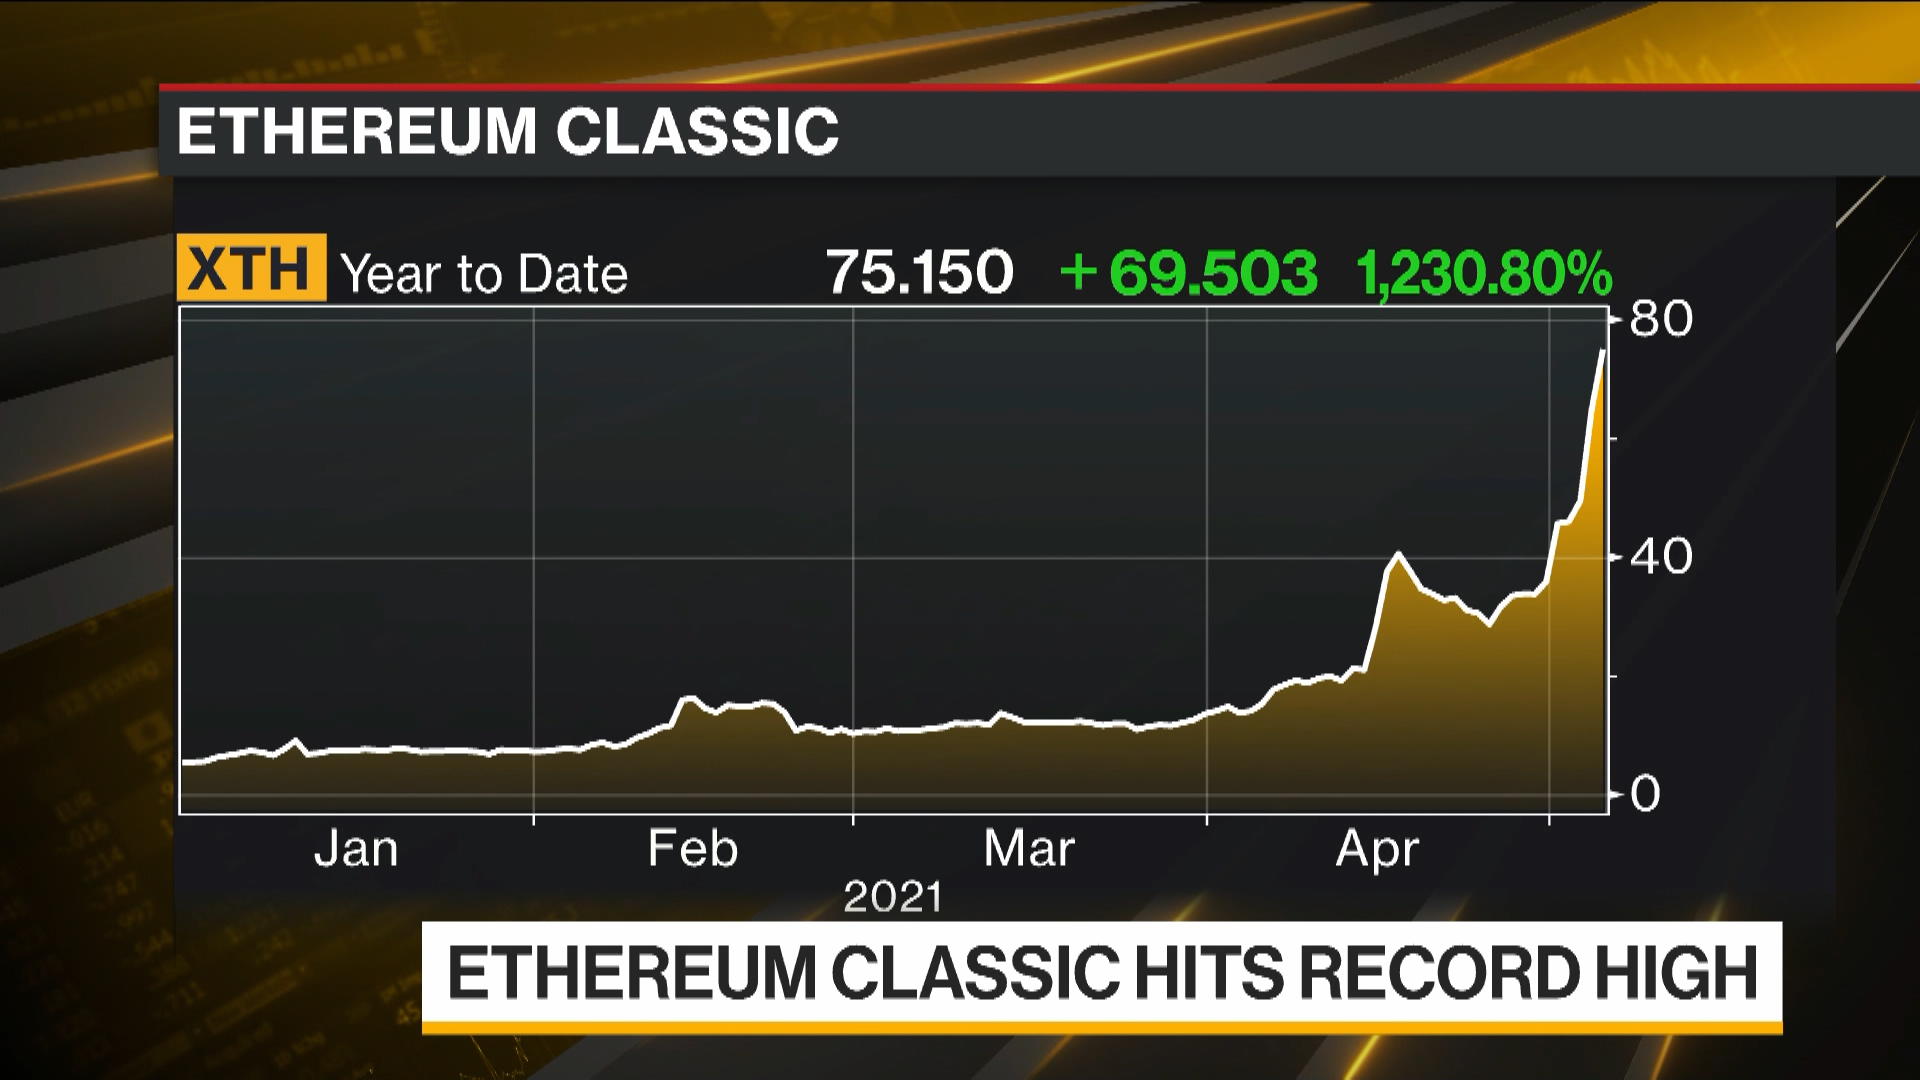 Why ethereum classic is going down today